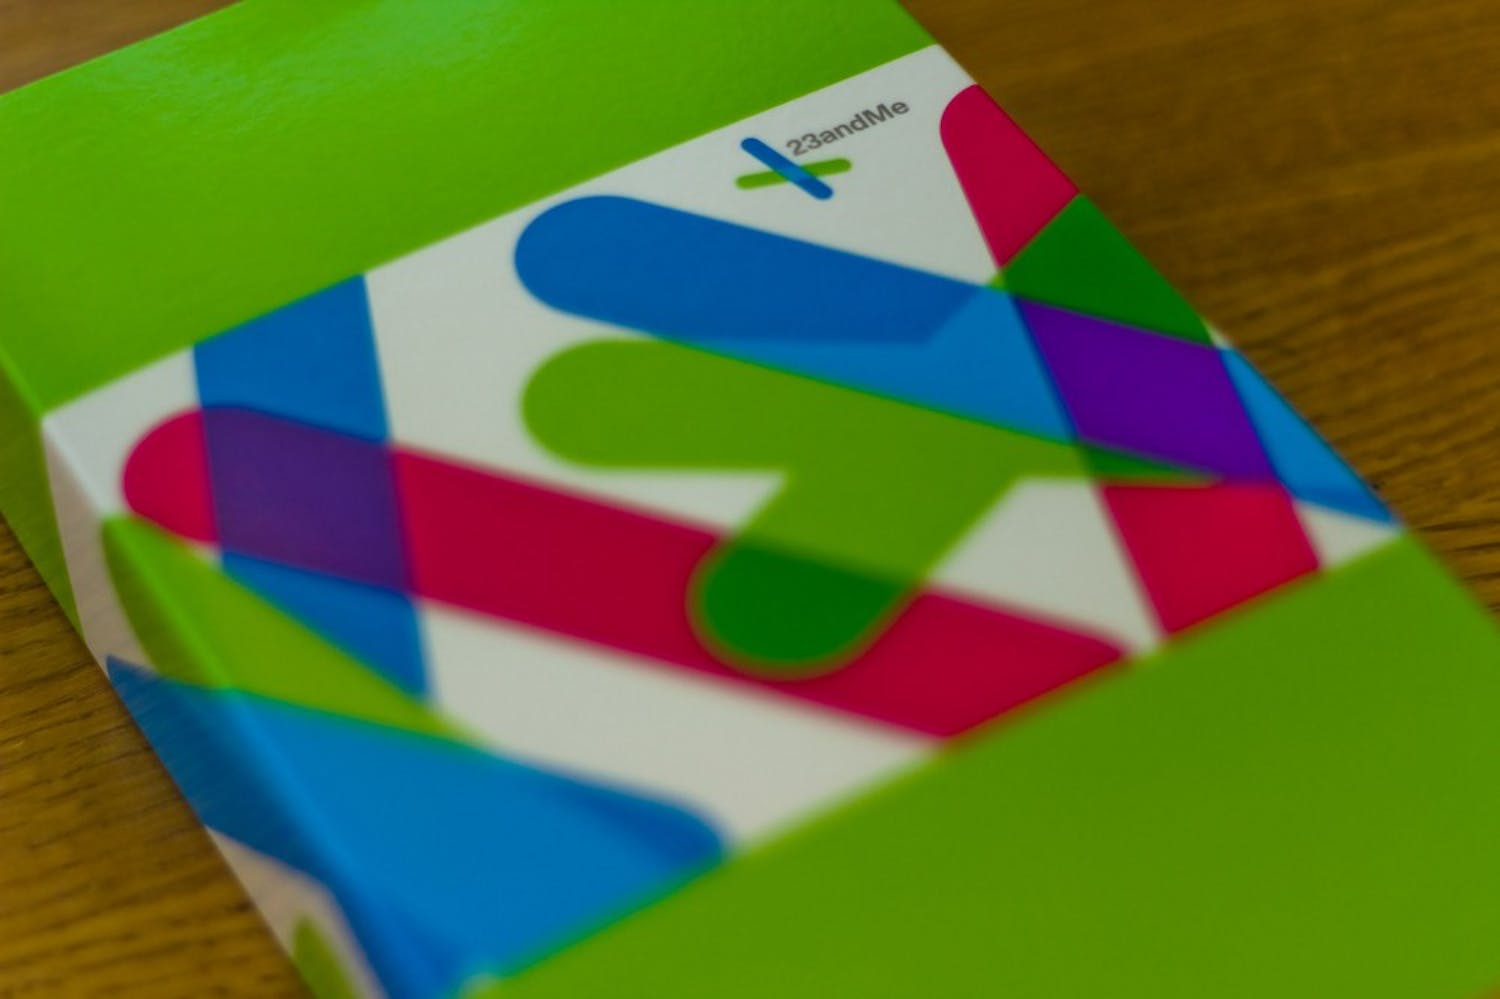 23andMe, a genetic testing company, helps people discover information about their DNA through a saliva sample.  Students who used the kits said it’s helped them learn more about the specifics of their genetic makeup.